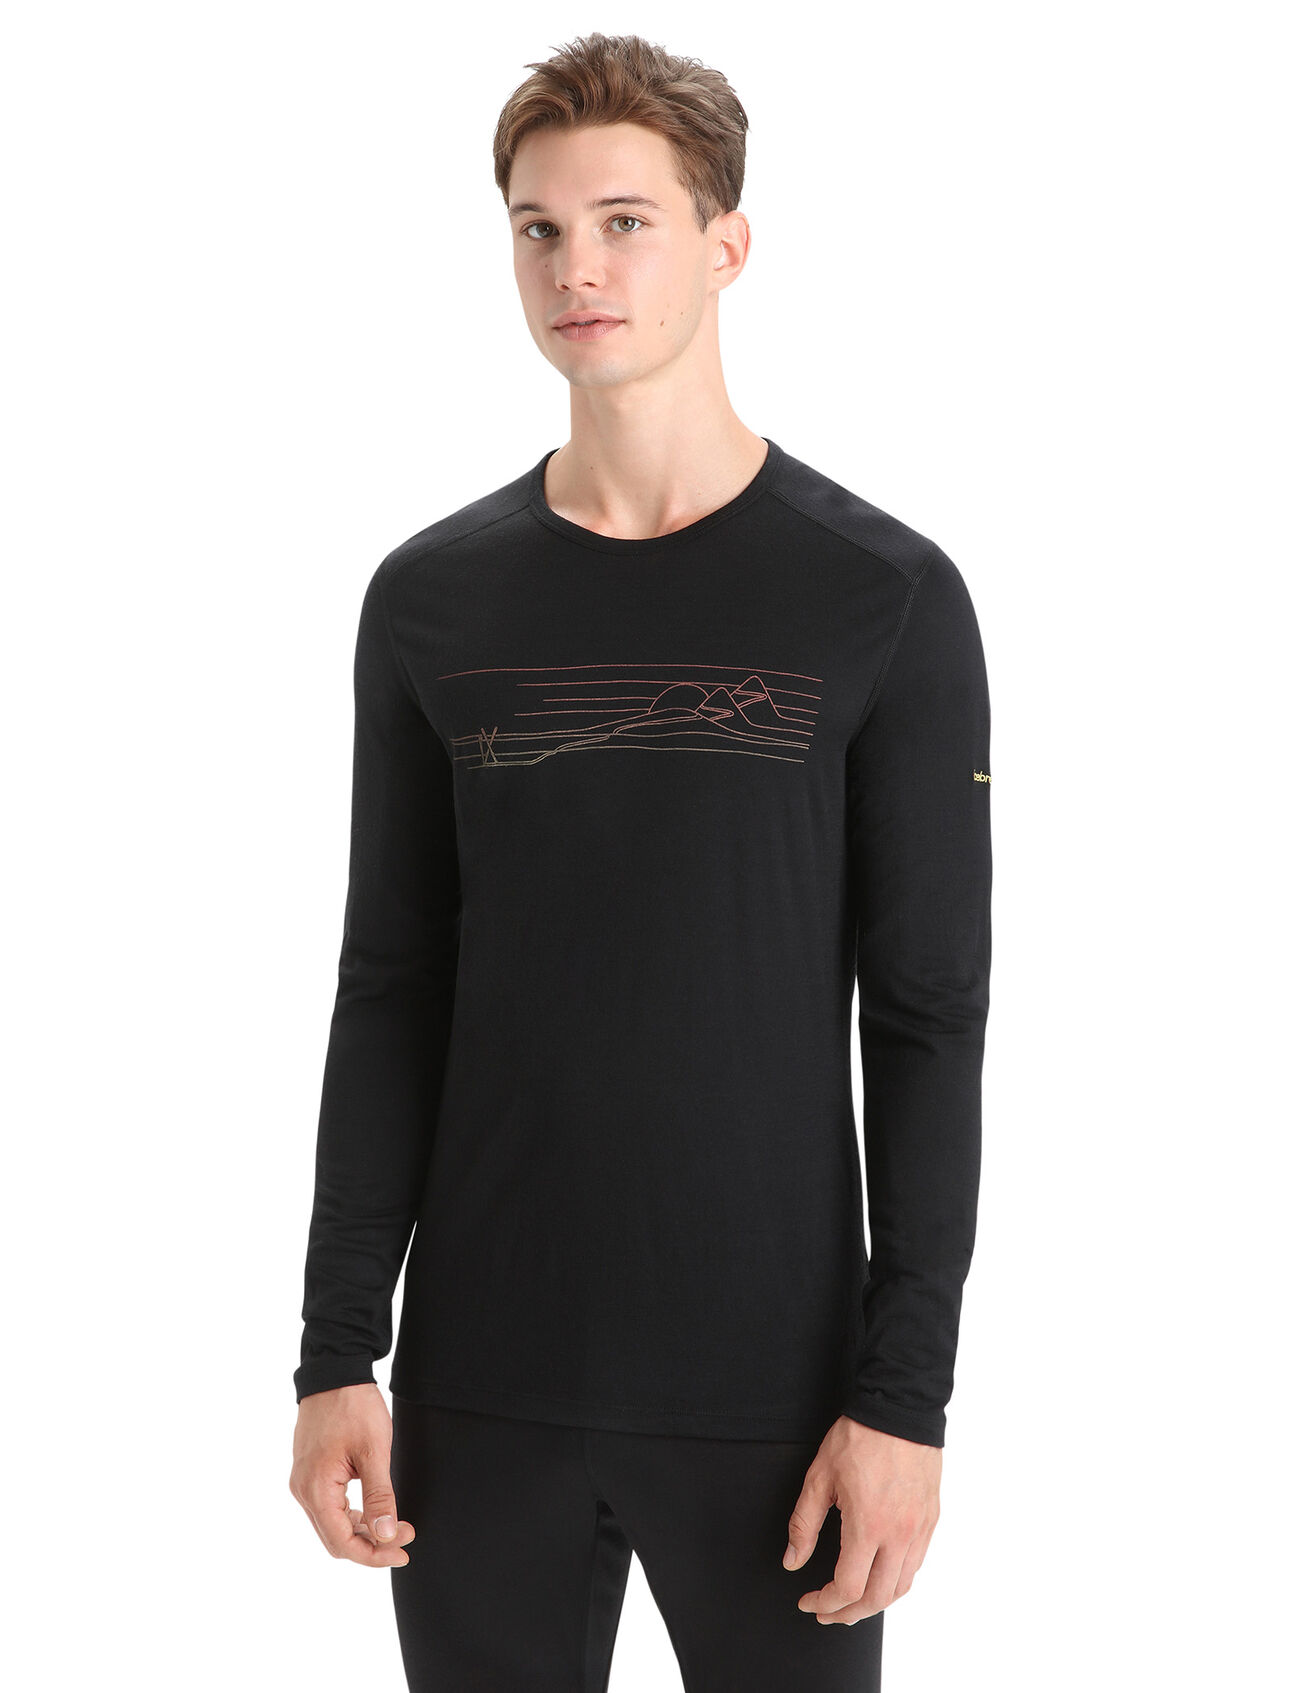 Mens Merino 200 Oasis Long Sleeve Crewe Thermal Top Ski Stripes The benchmark against which all others are judged, the 200 Oasis Long Sleeve Crewe Ski Stripes features our most versatile merino jersey fabric for year-round layering performance across any activity, with a hand-drawn sketch by Damon Watters.